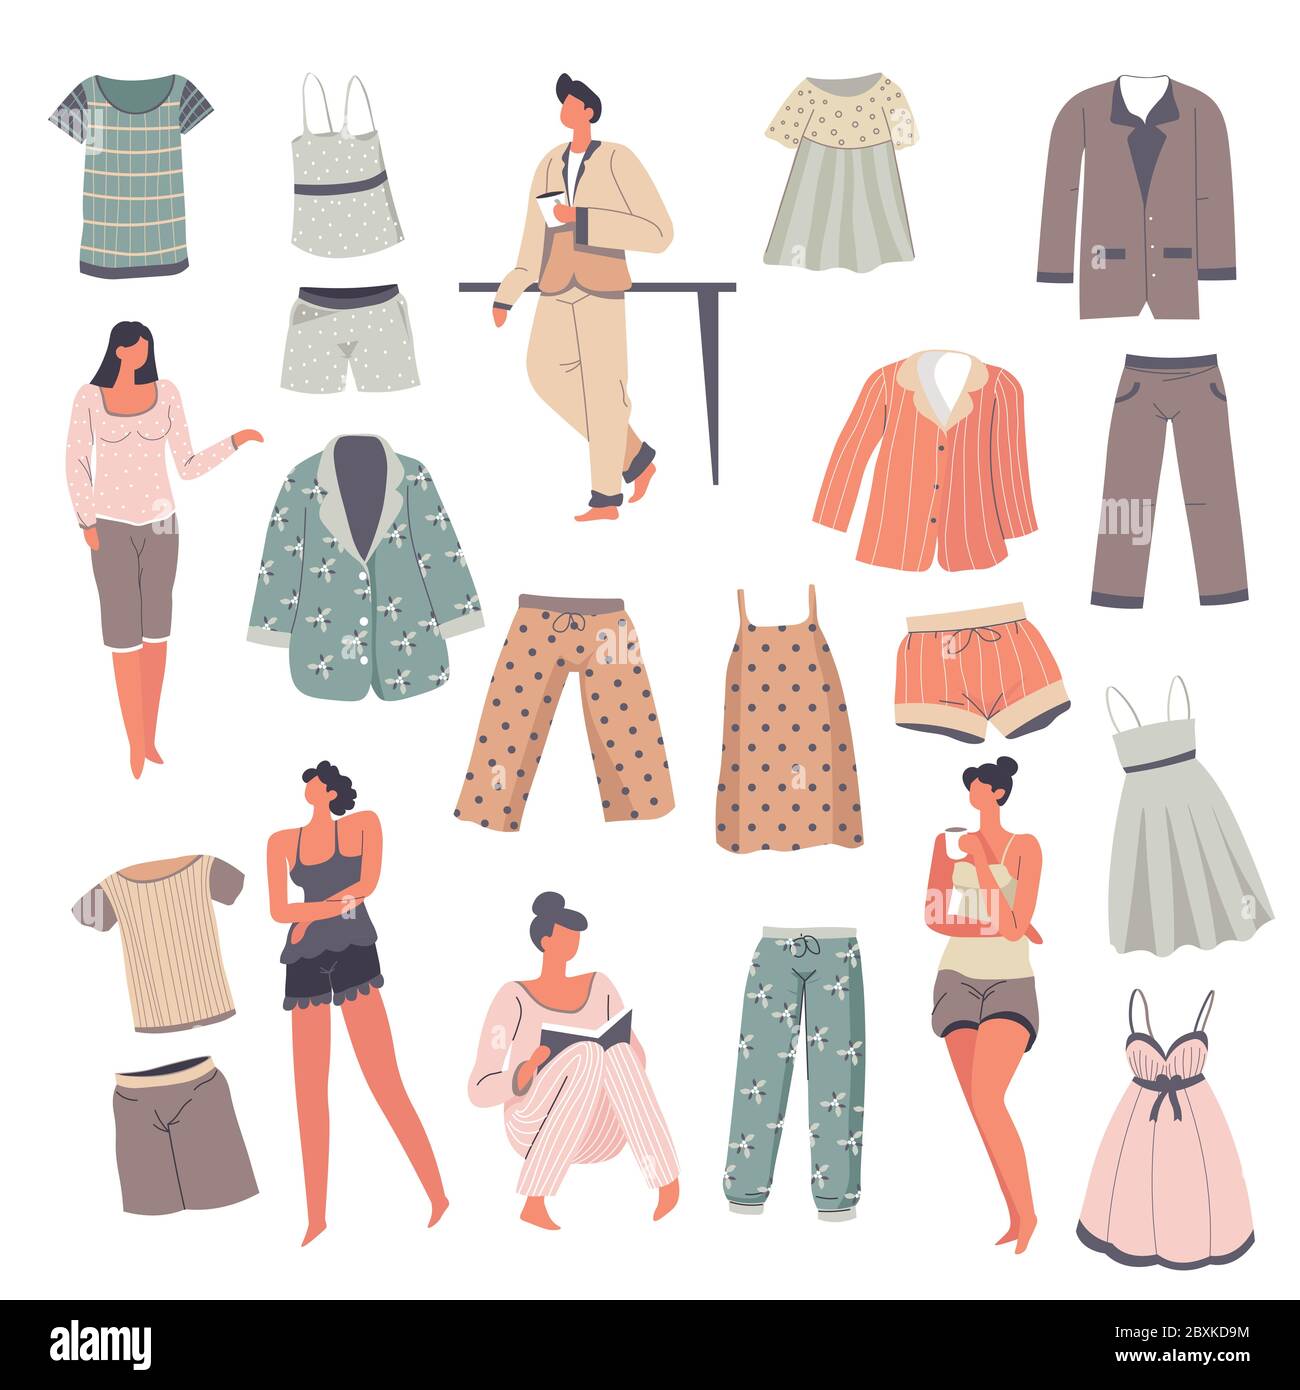 Pink nightshirt Stock Vector Images - Alamy